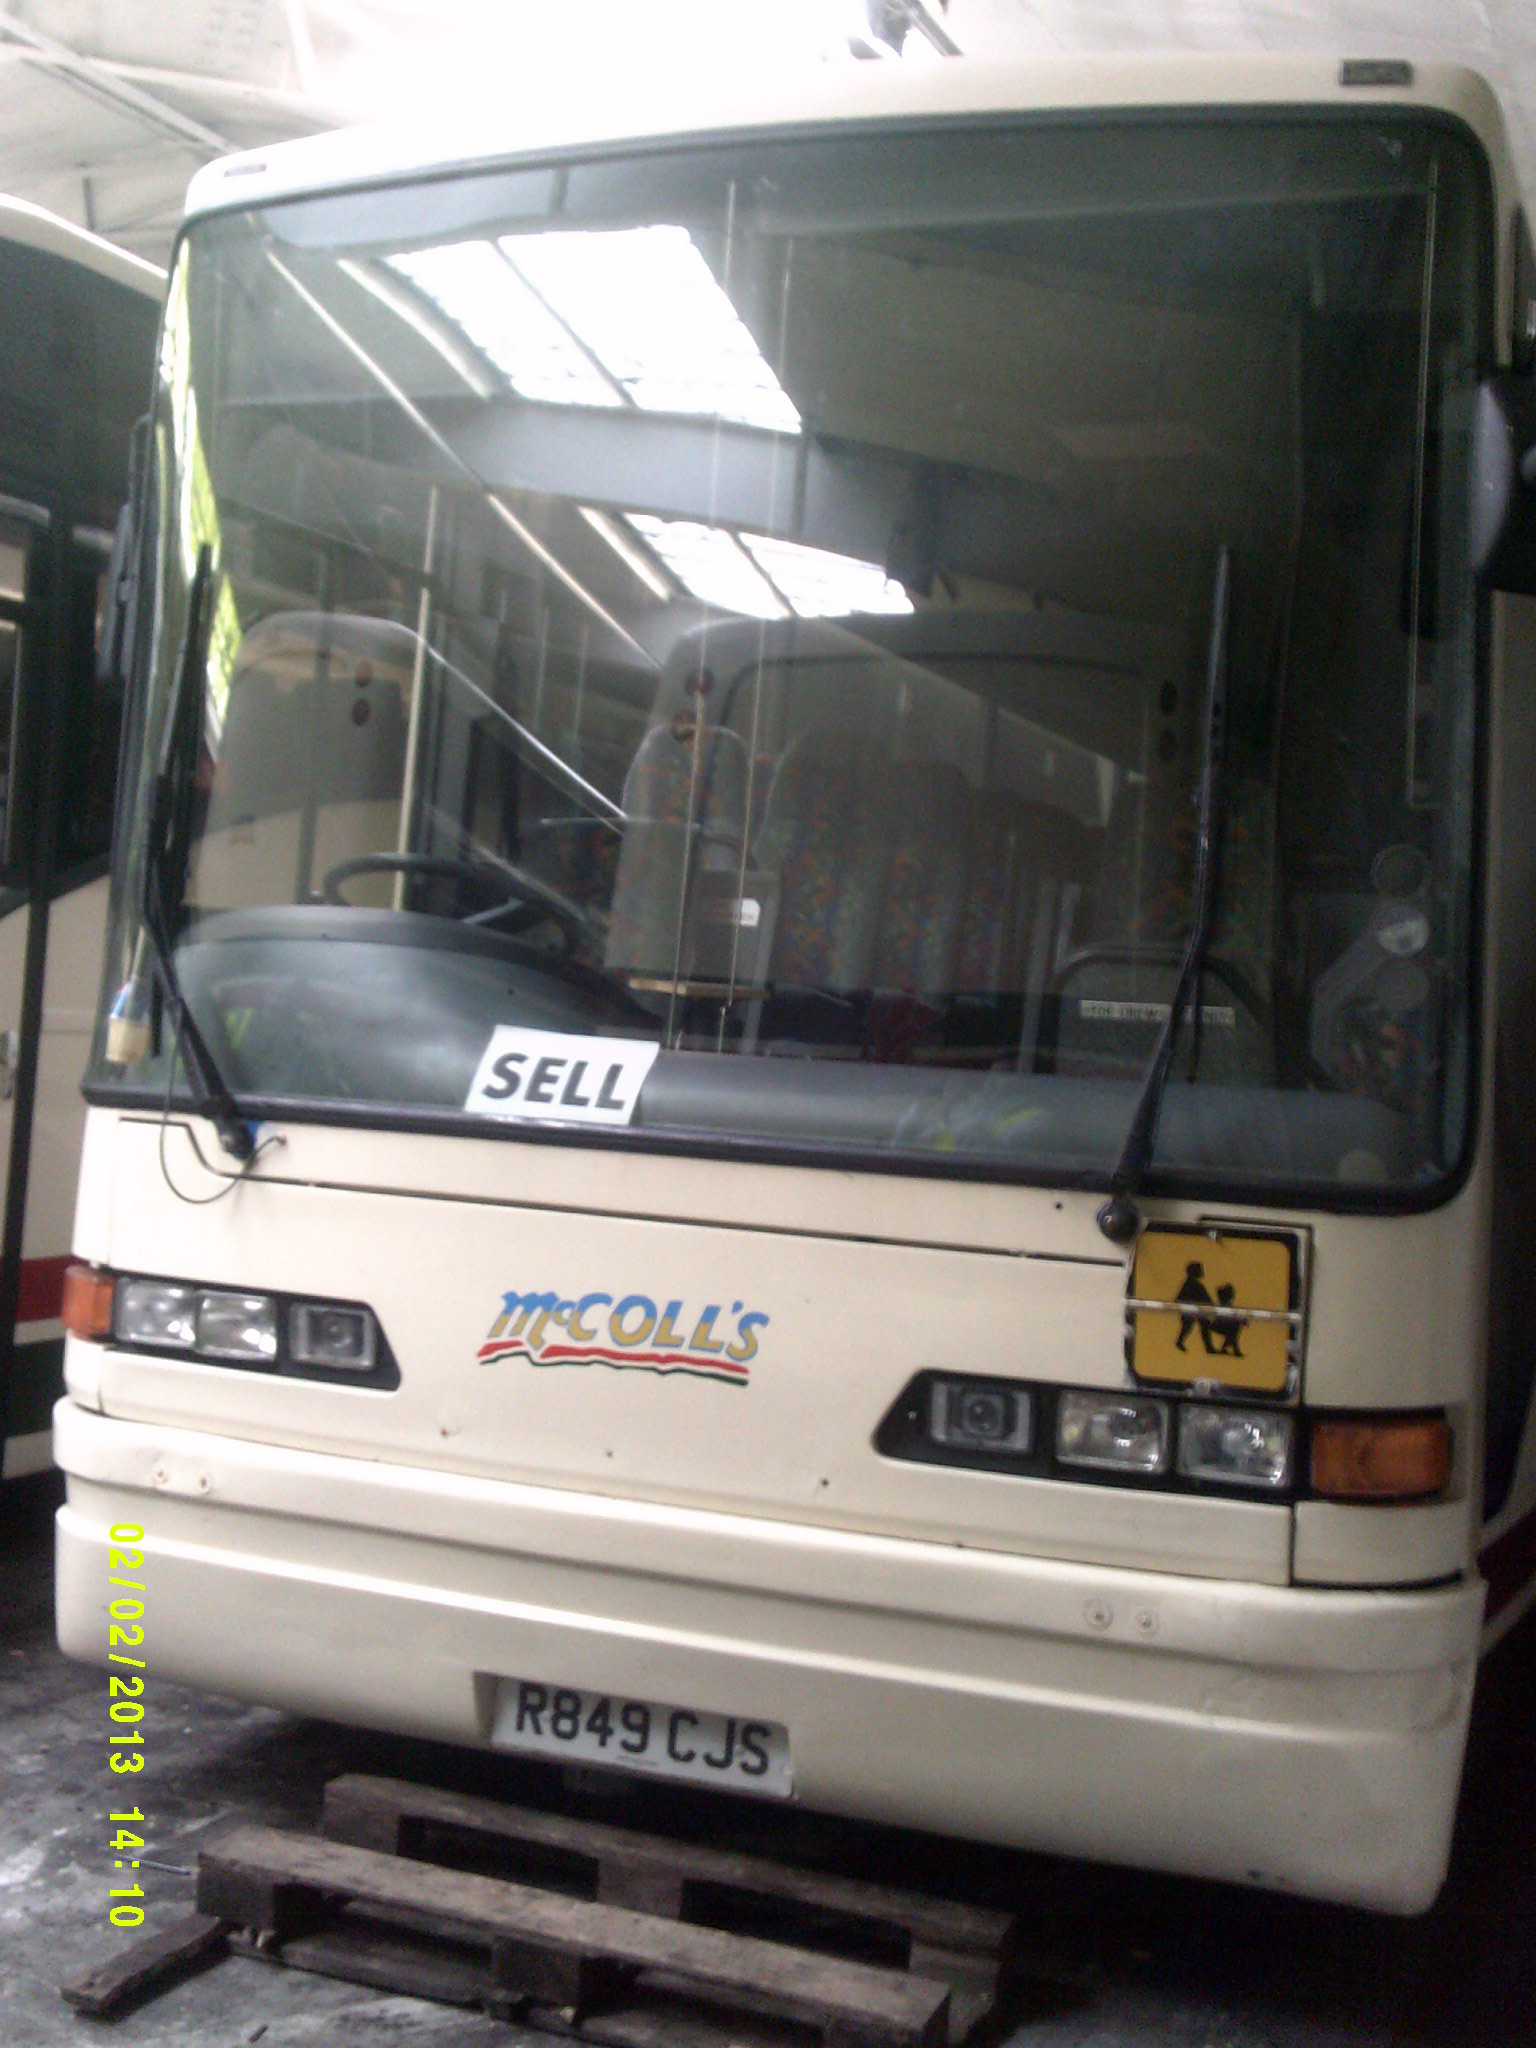 the front end of a bus is seen in this po